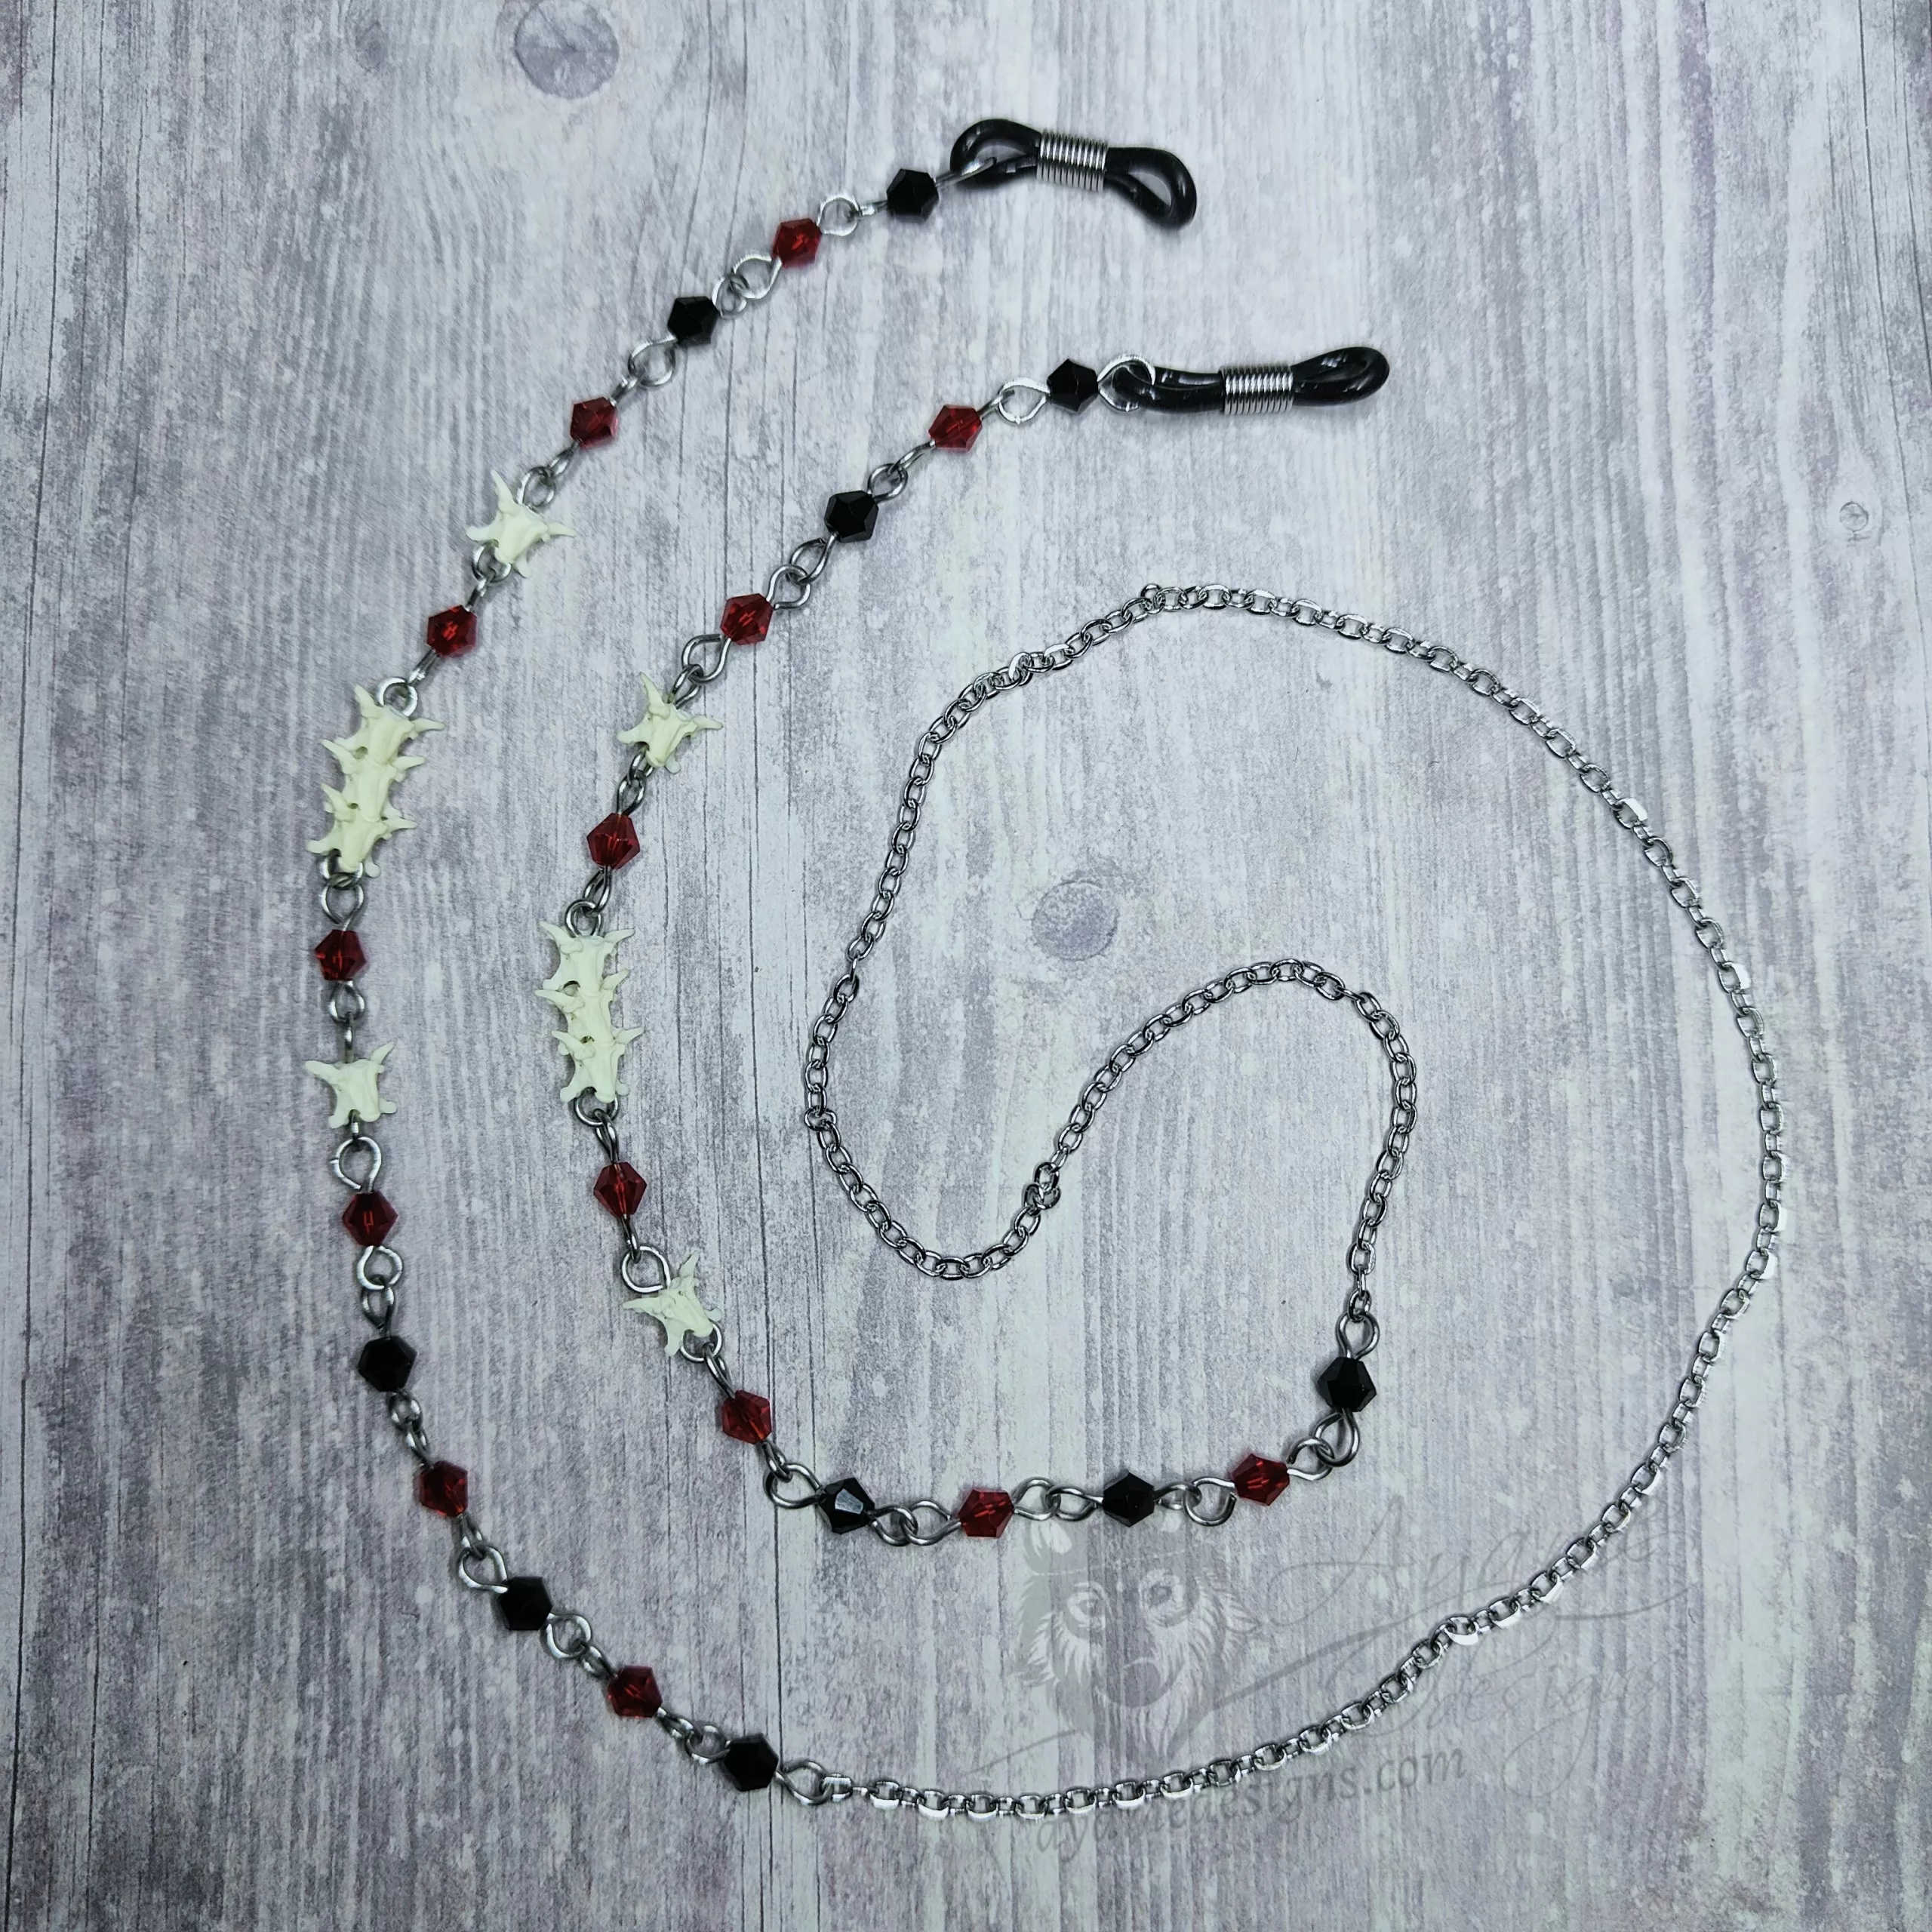 Handmade gothic glasses chain with tiny snake vertebrae, red and black Austrian crystal beads and stainless steel chain